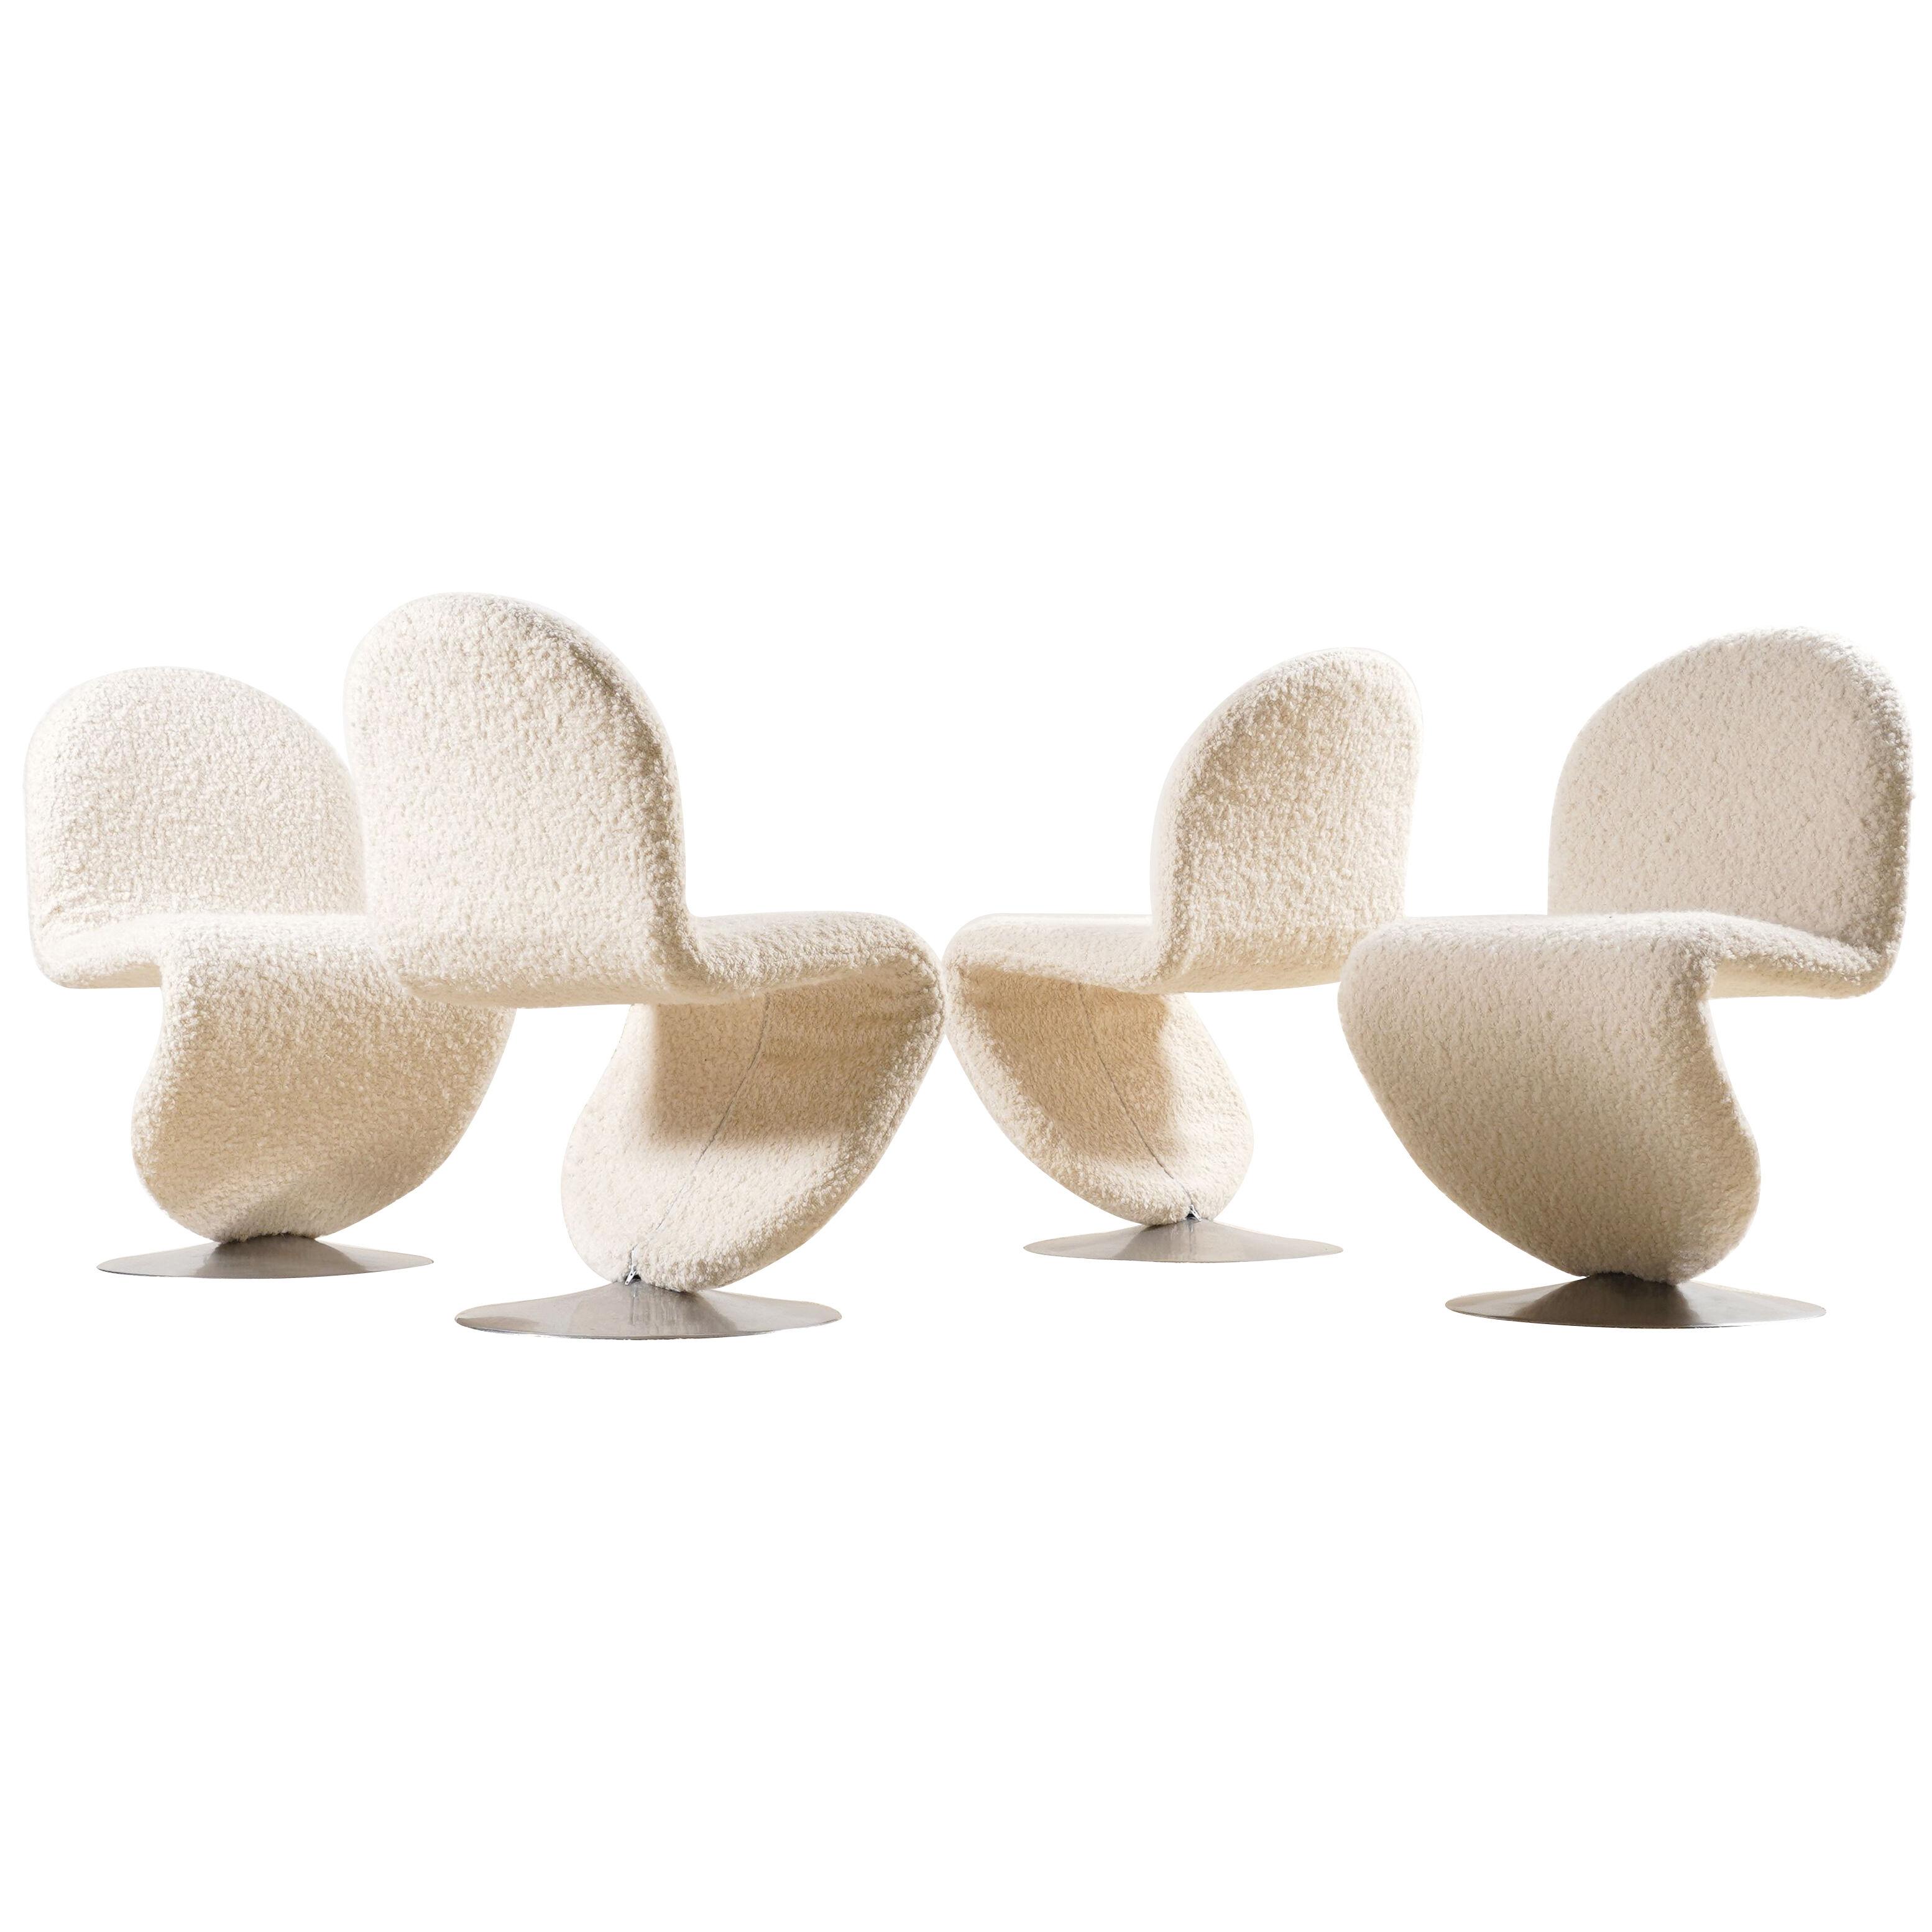 Verner Panton, Set of Four "A" Chairs "System 1-2-3" for Fritz Hansen, 1970s